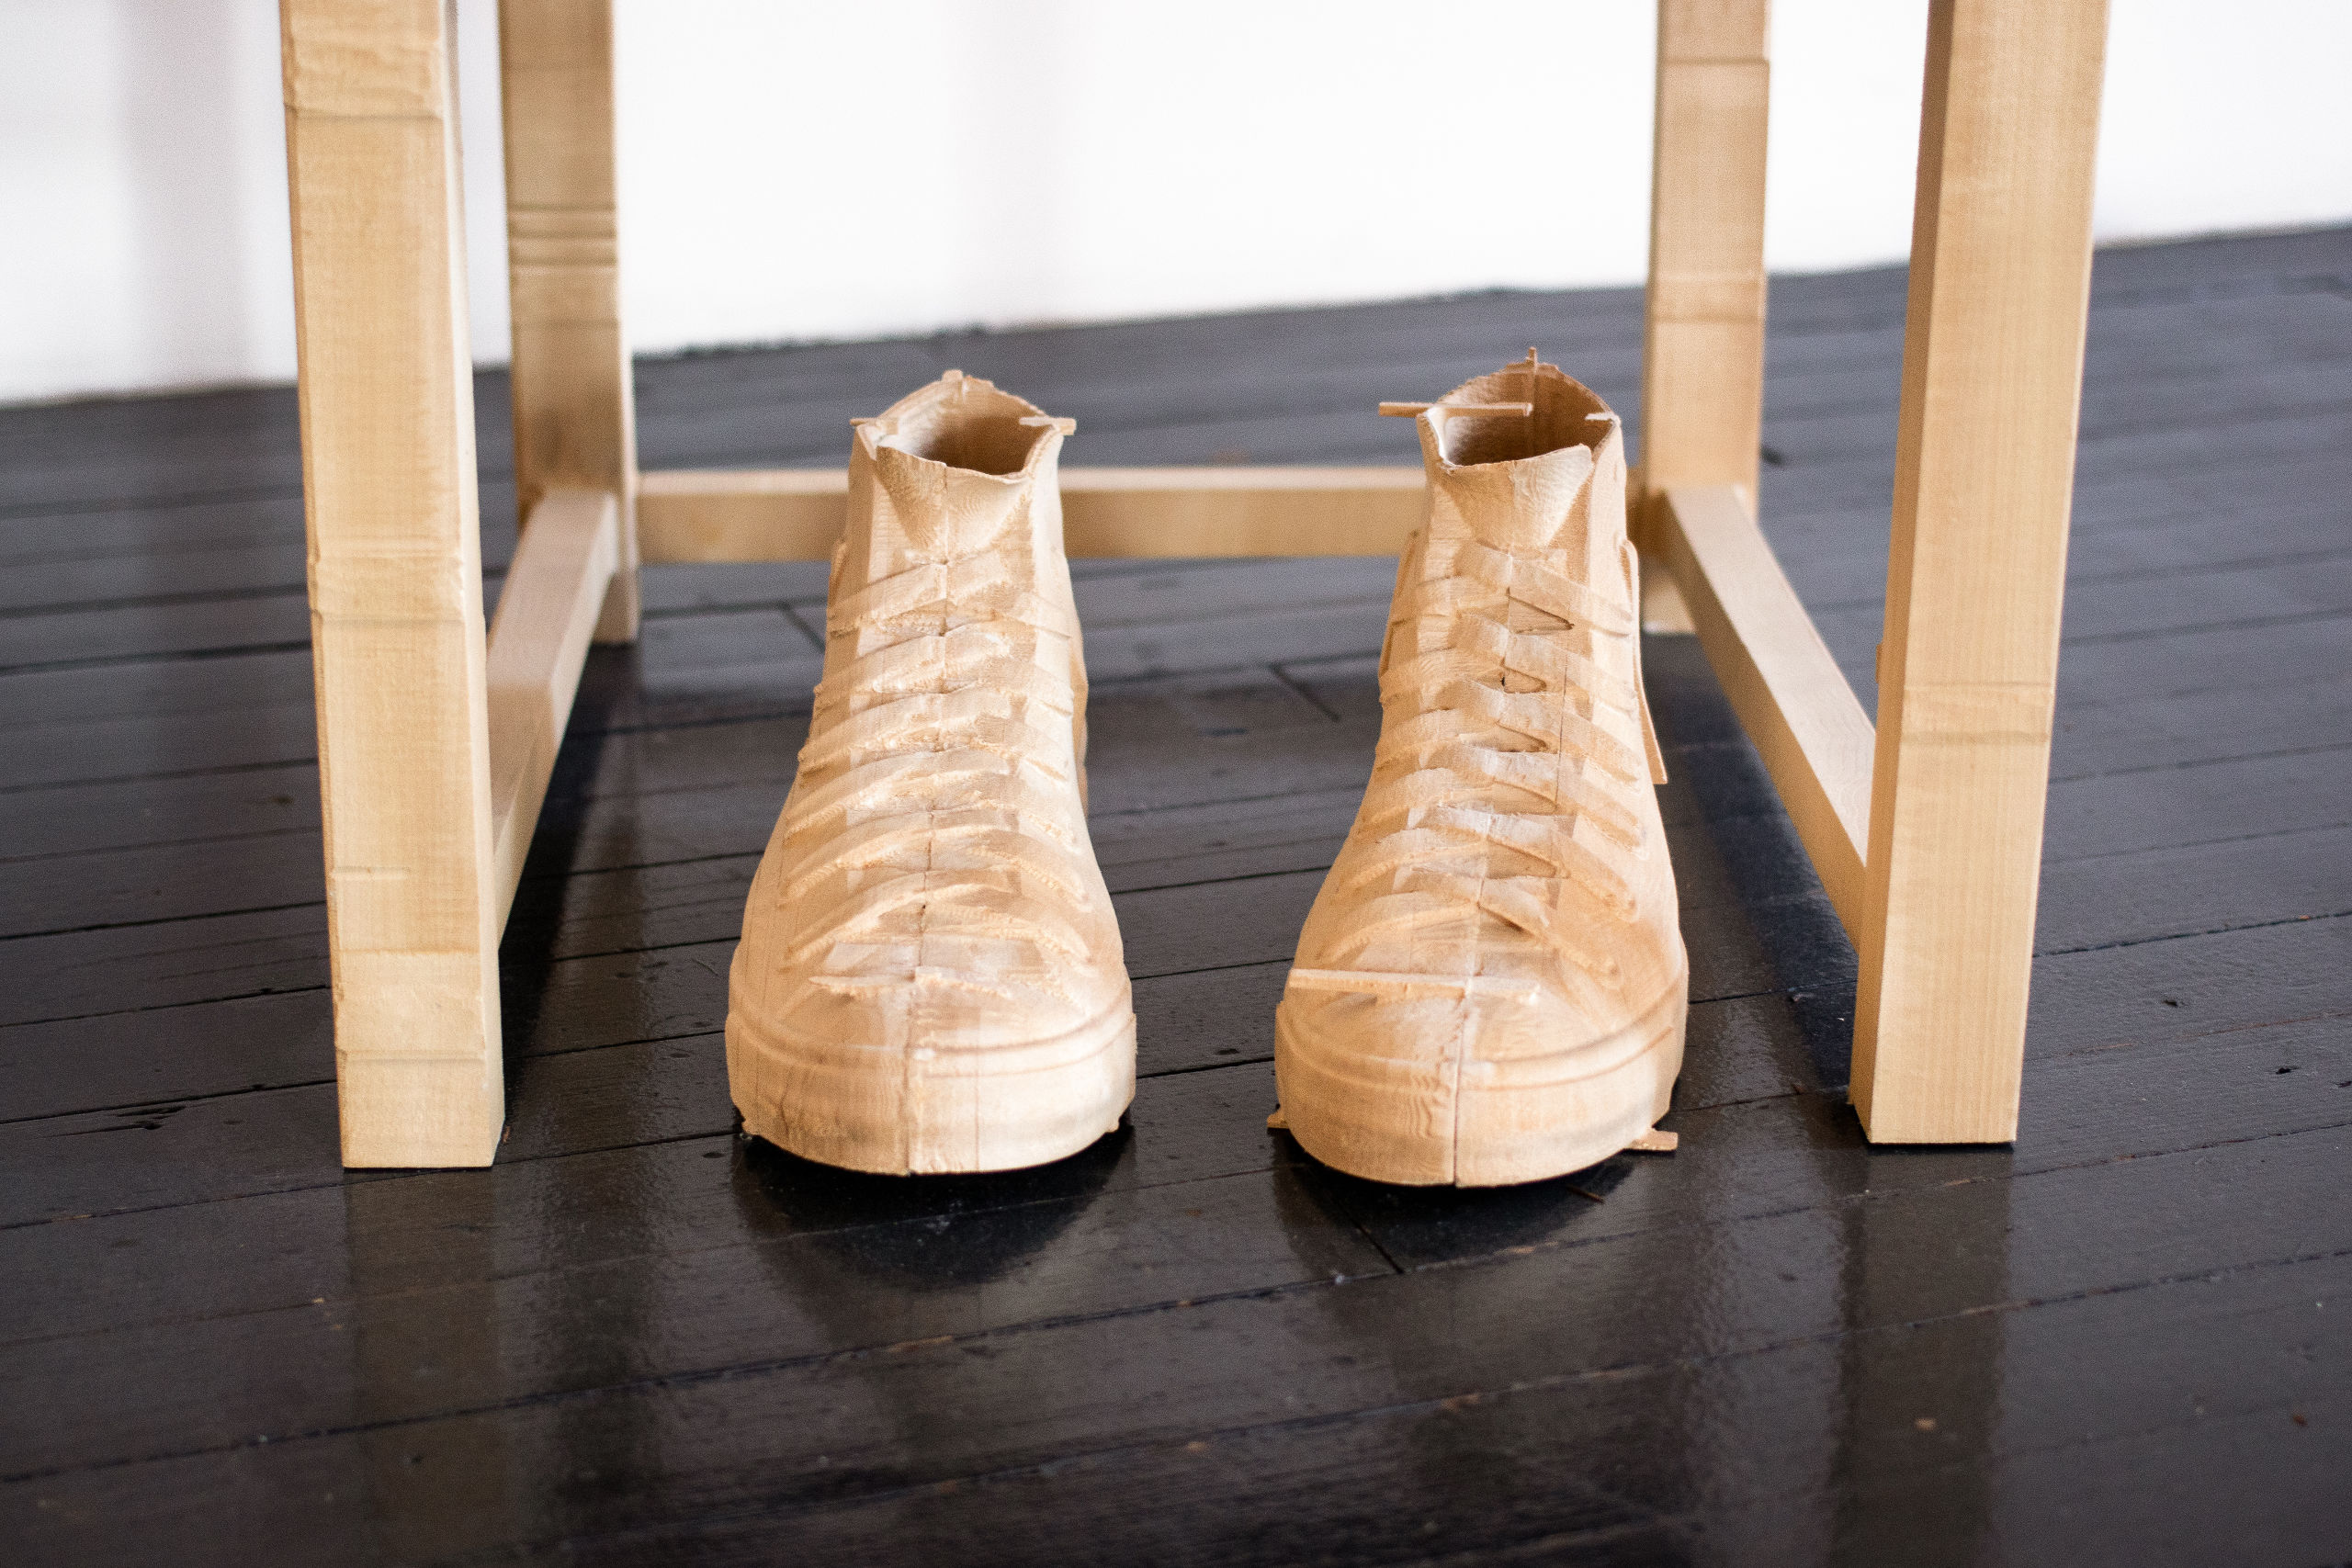 Wood sculpture of empty sneakers in front of a chair.